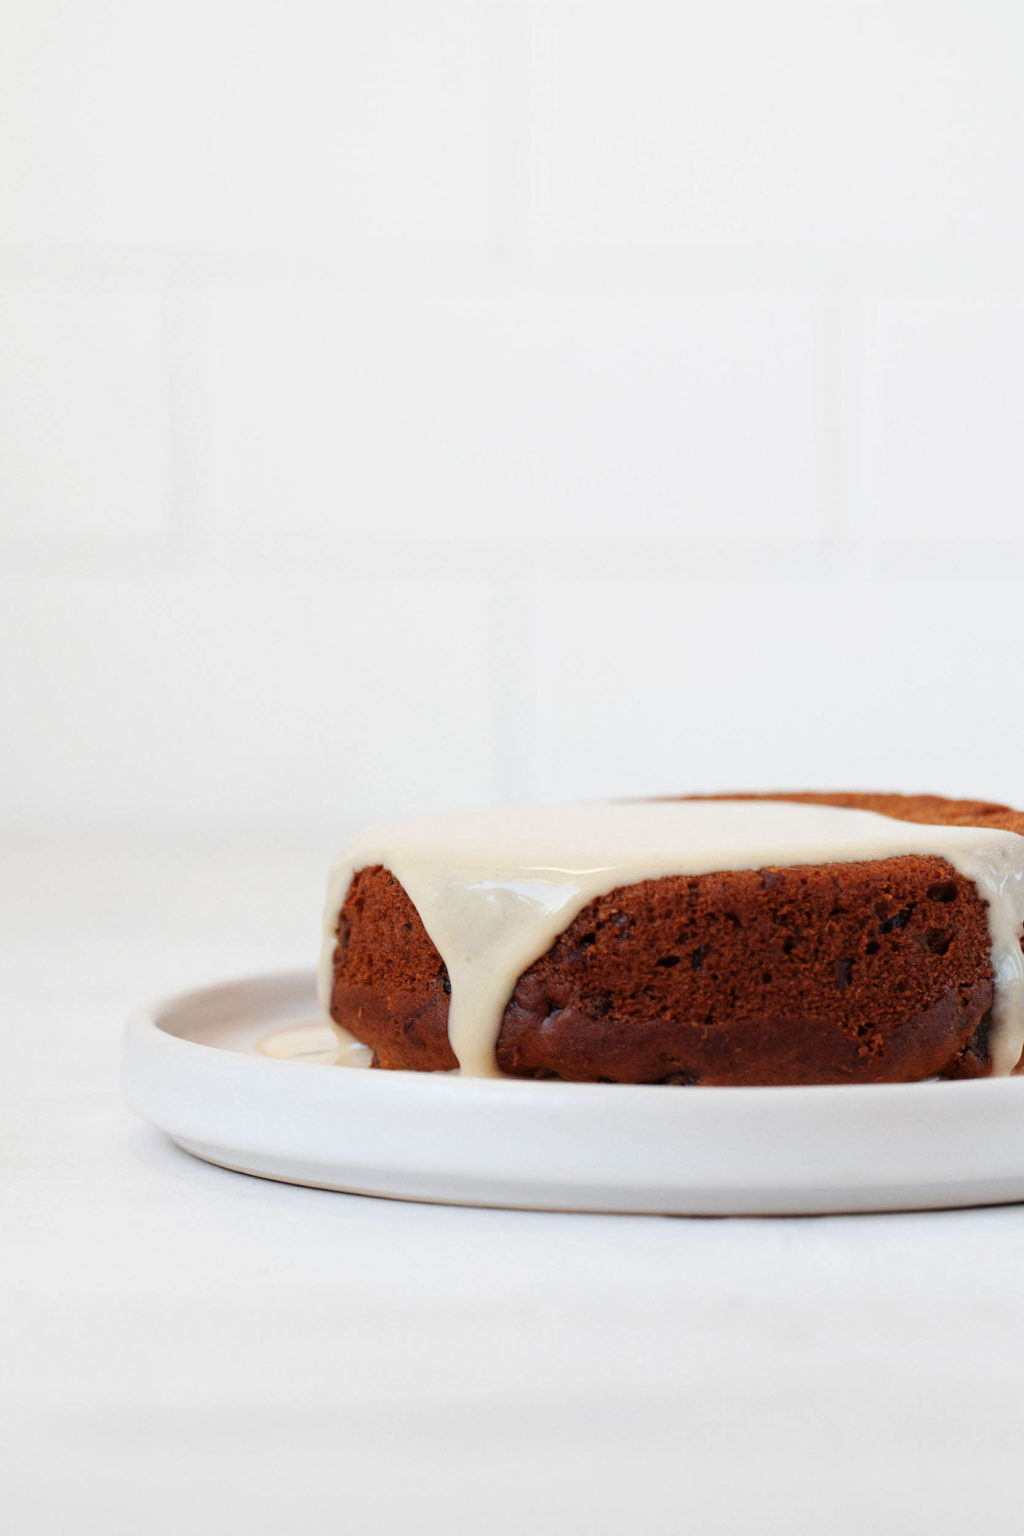 A round vegan sticky toffee pudding is resting on a small white dessert plate. It's topped with a cream sauce. There's a white brick backdrop visible behind it.